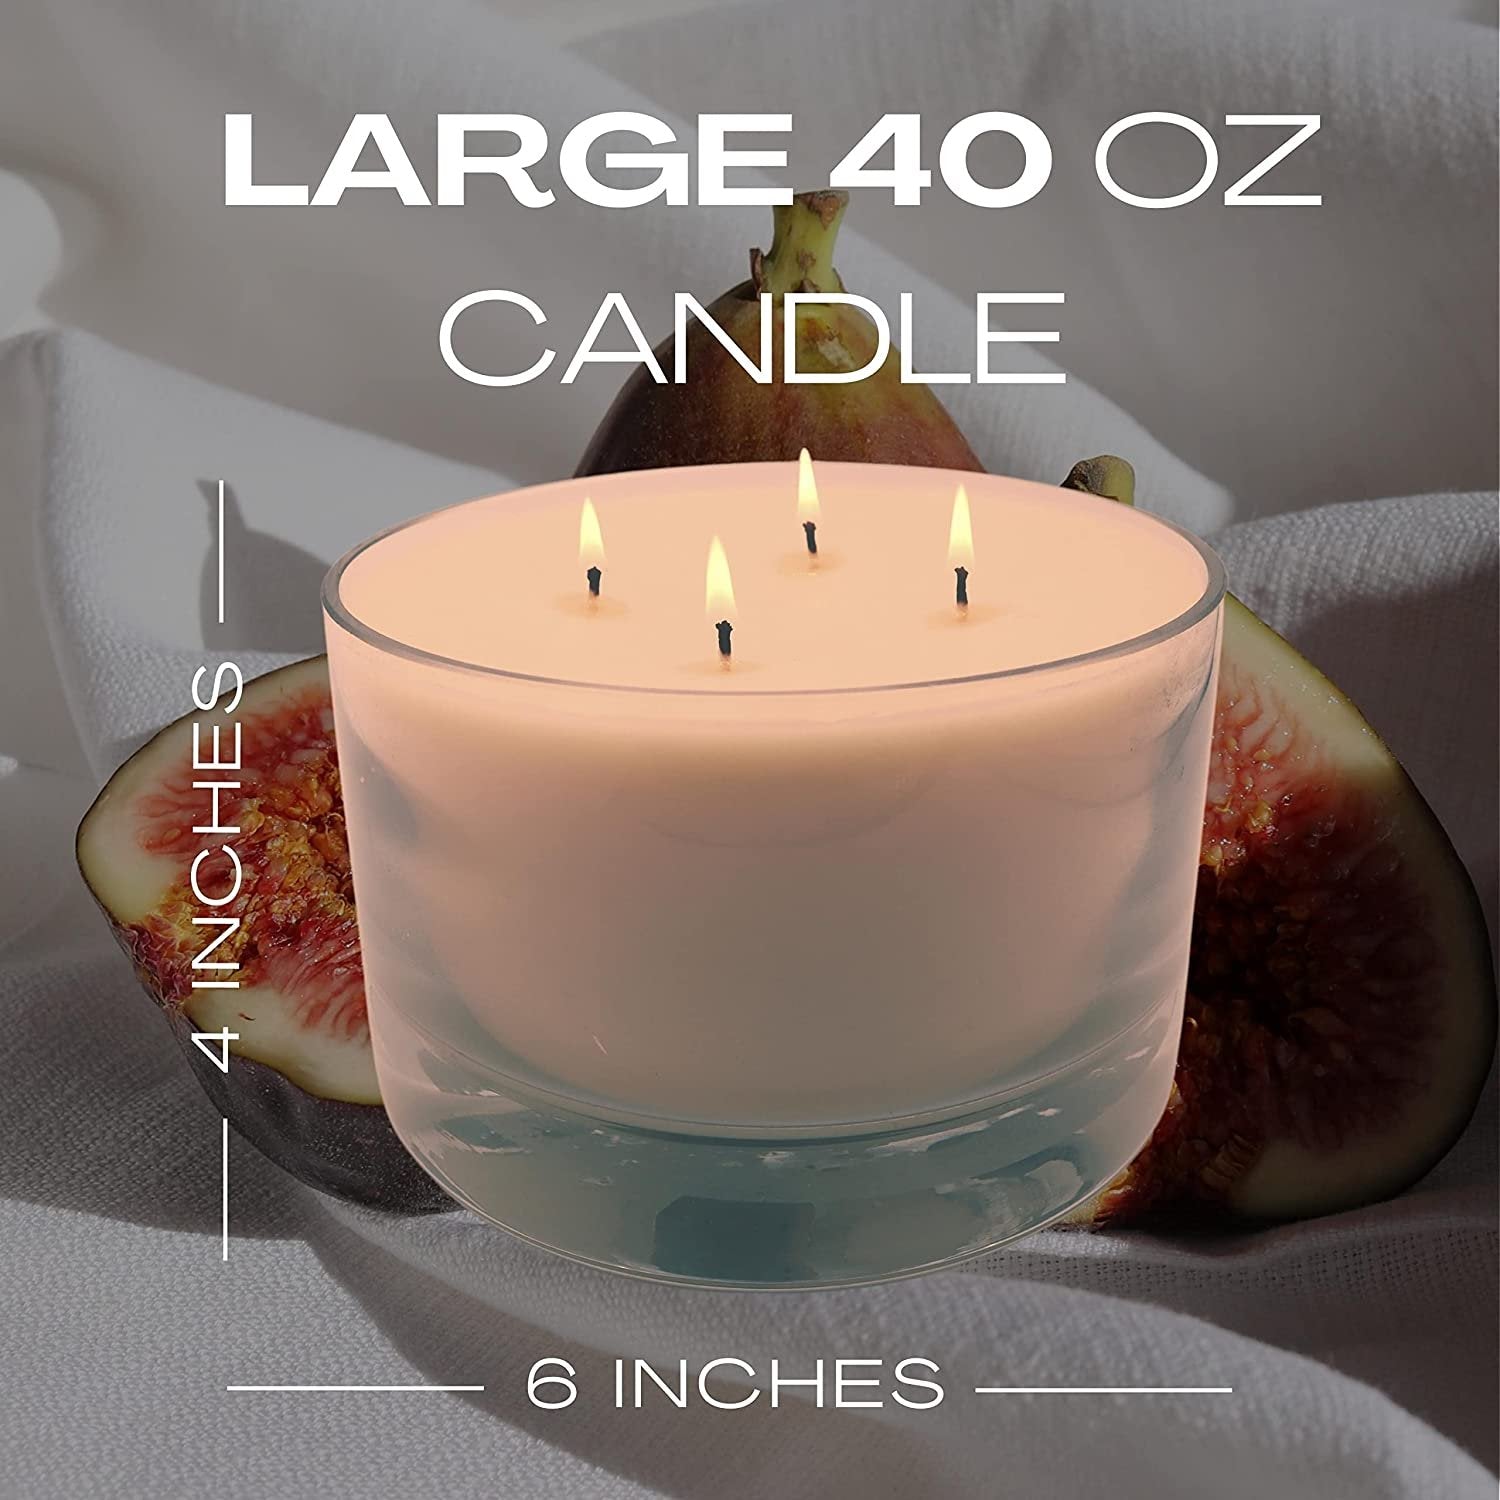 American-Made Candles from the Tyler Candle Company